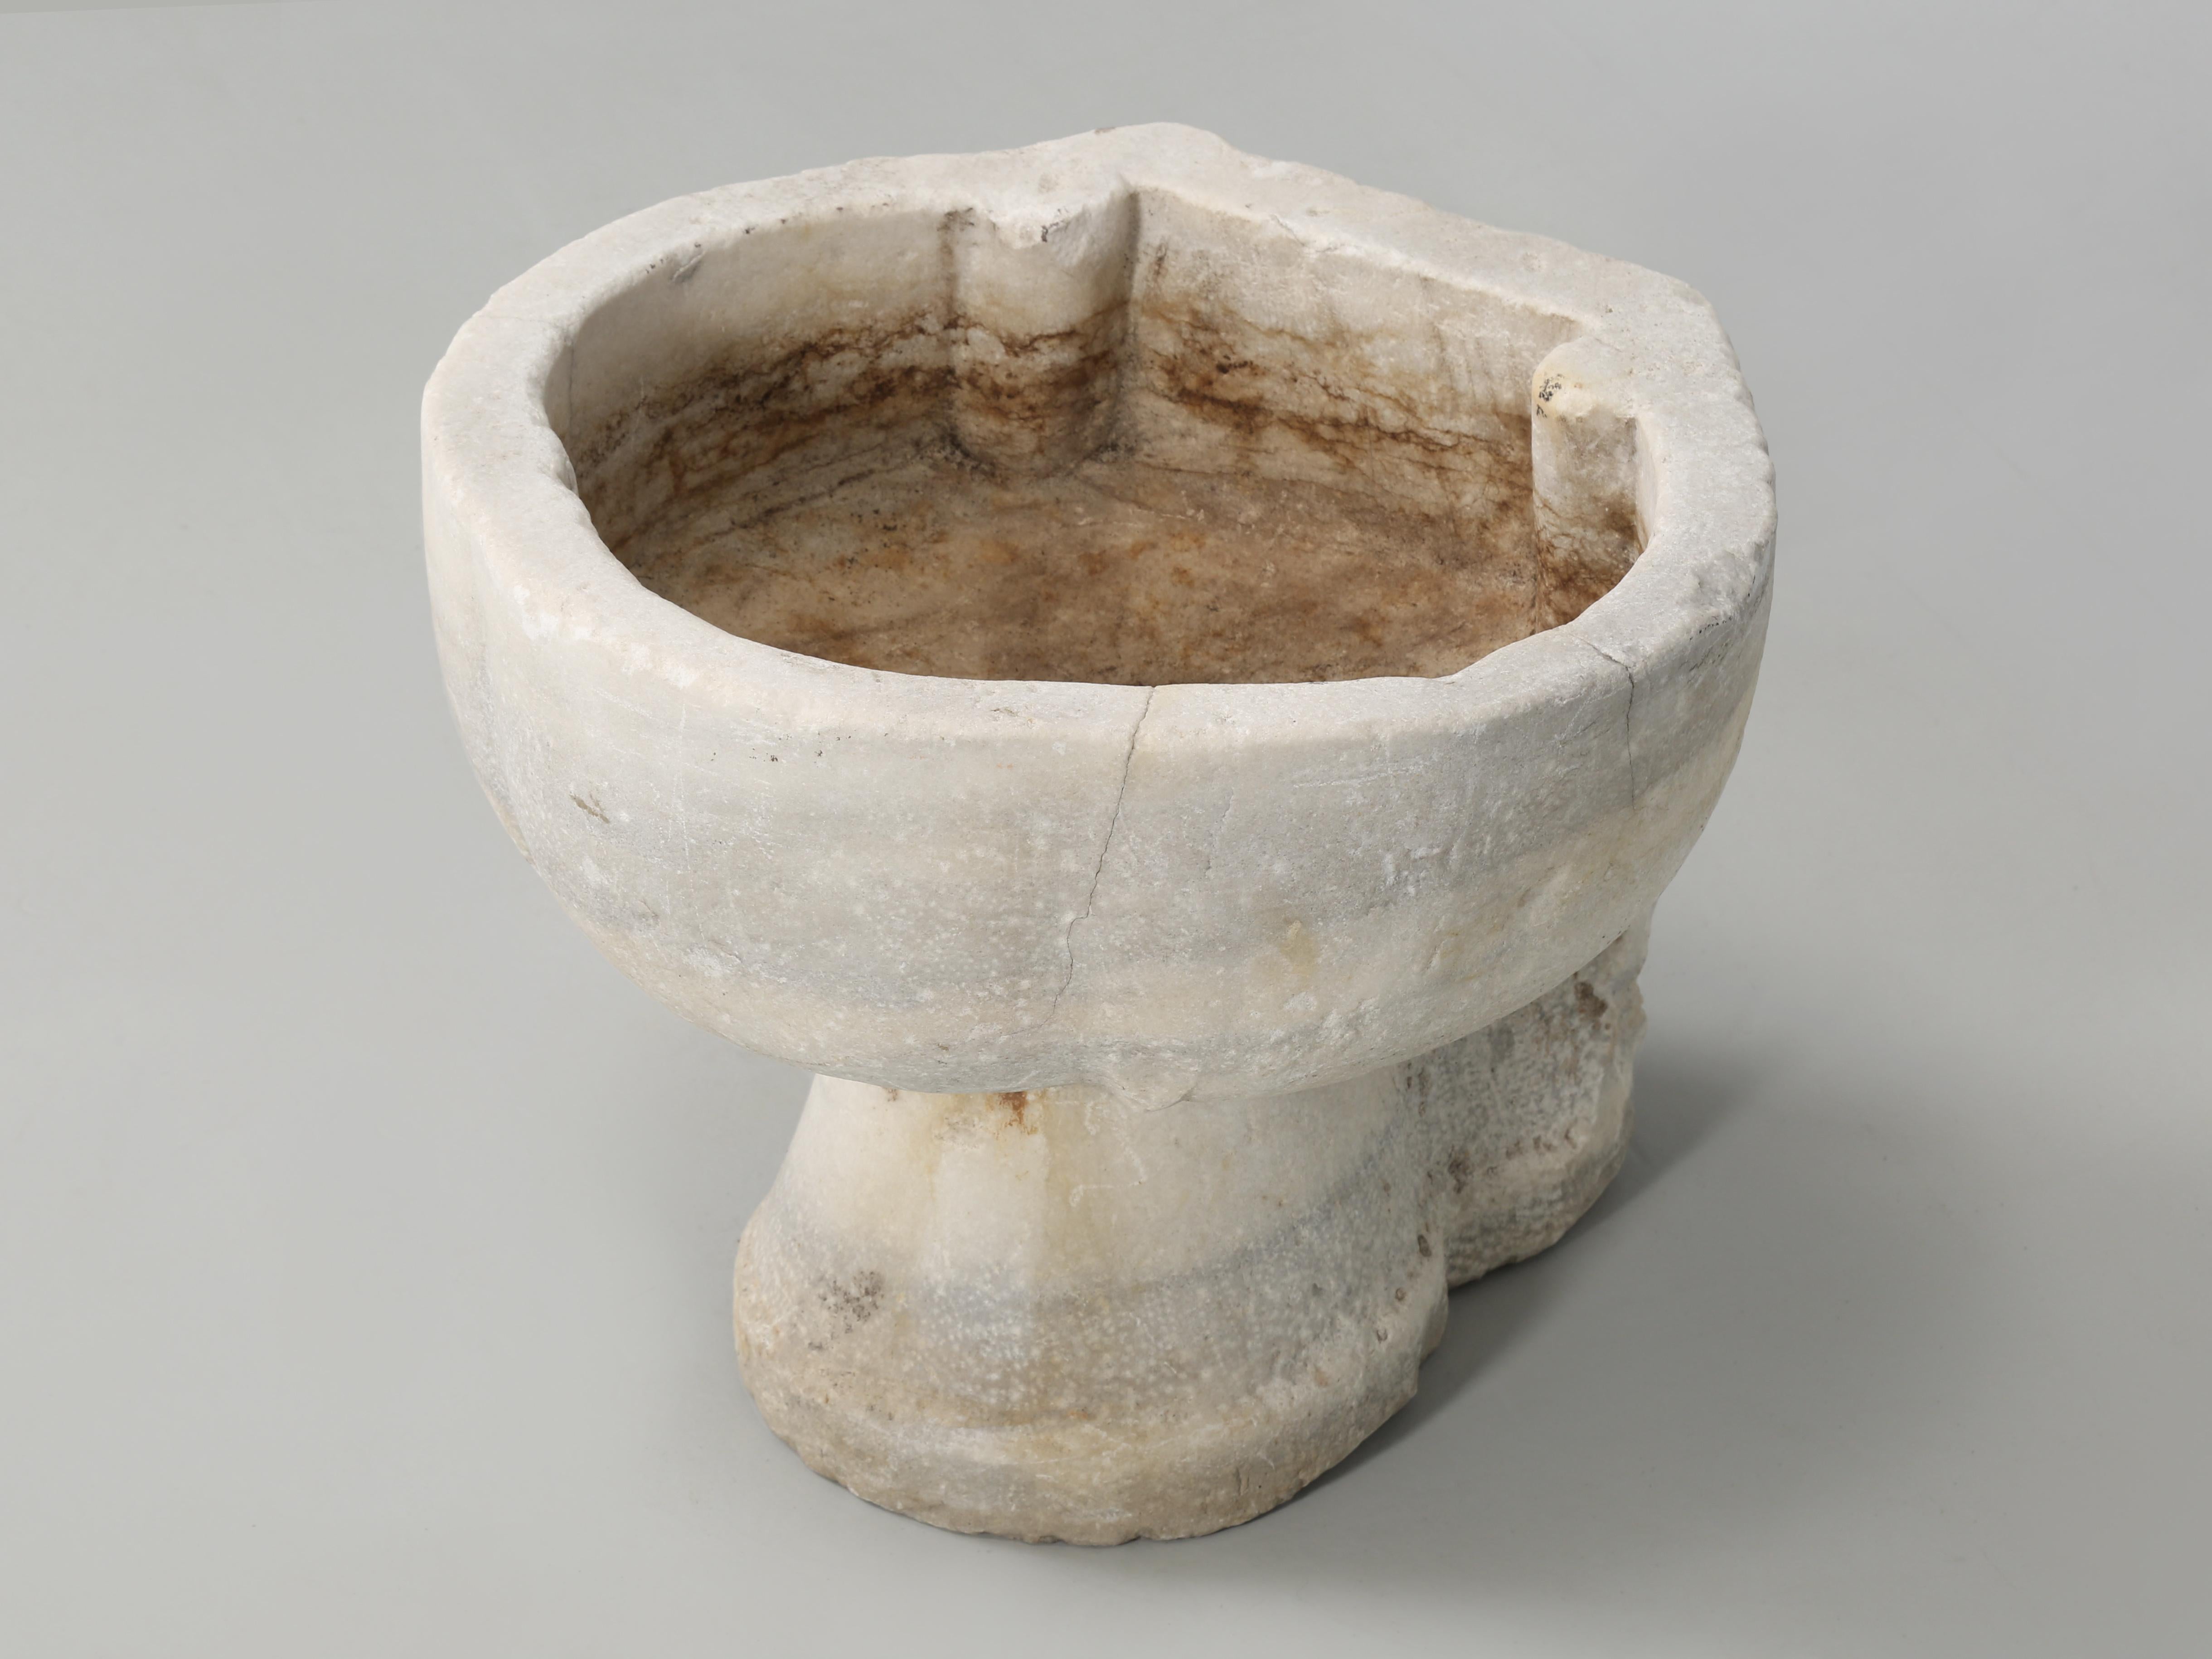 Although this may look like a holy water font from an ancient Italian church, we believe it’s probably a marble wash basin, or sink based on the fact that it has an old drain hole. You can clearly see that the marble sink was mounted into a wall and